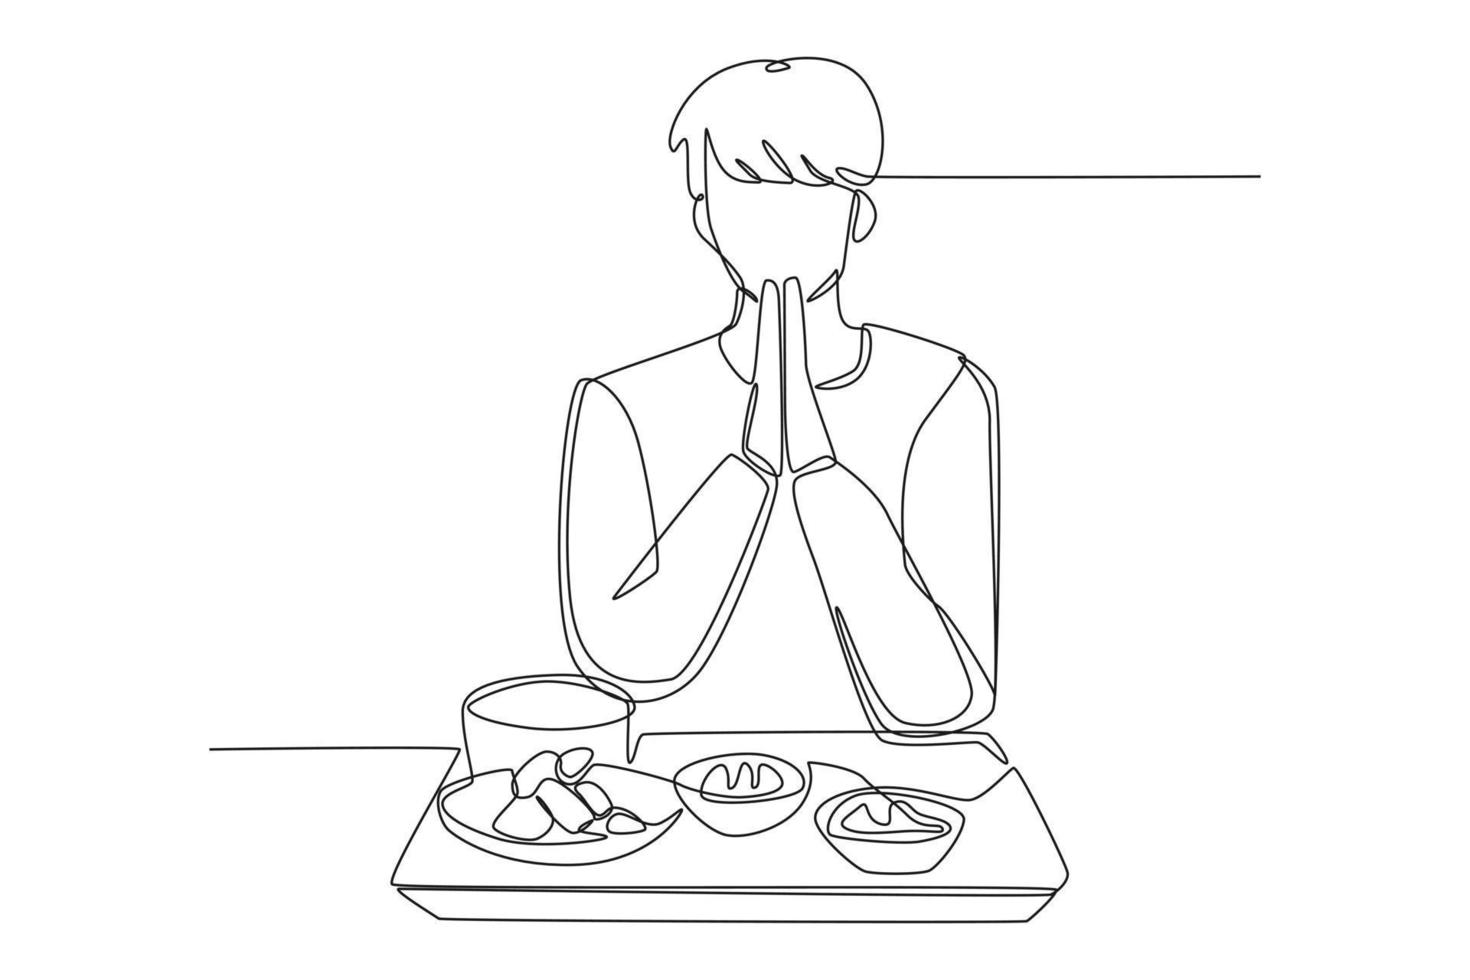 Continuous one line drawing young boy praying before eating. Eating activity concept. Single line draw design vector graphic illustration.